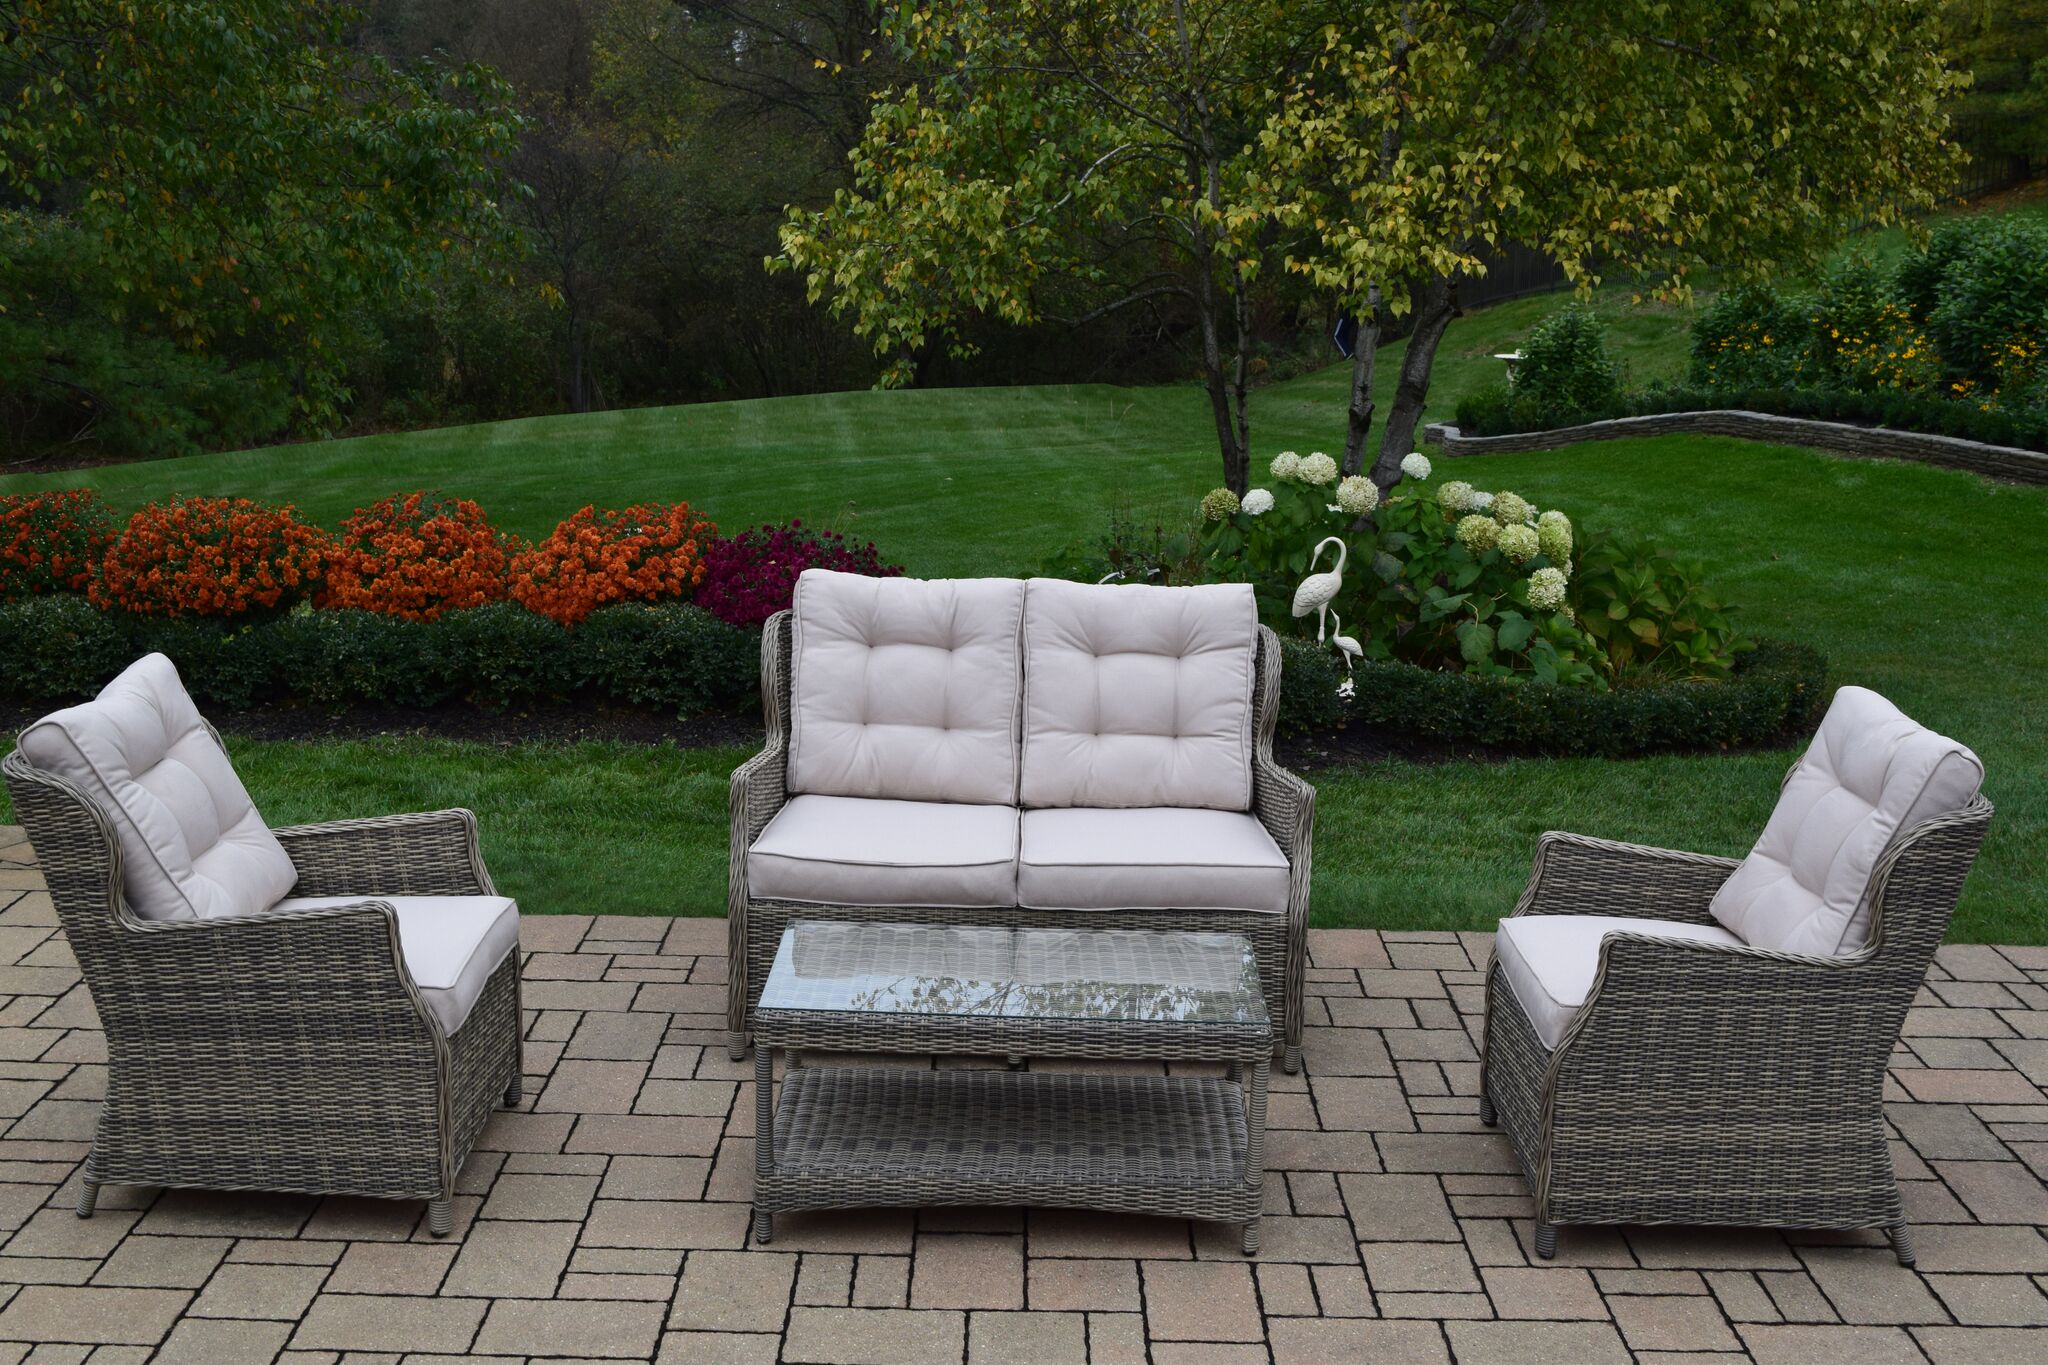 CC Outdoor Living 4-Piece Brown Borneo All-Weather Resin Wicker Chat Set w/ Gray Cushions - image 2 of 2